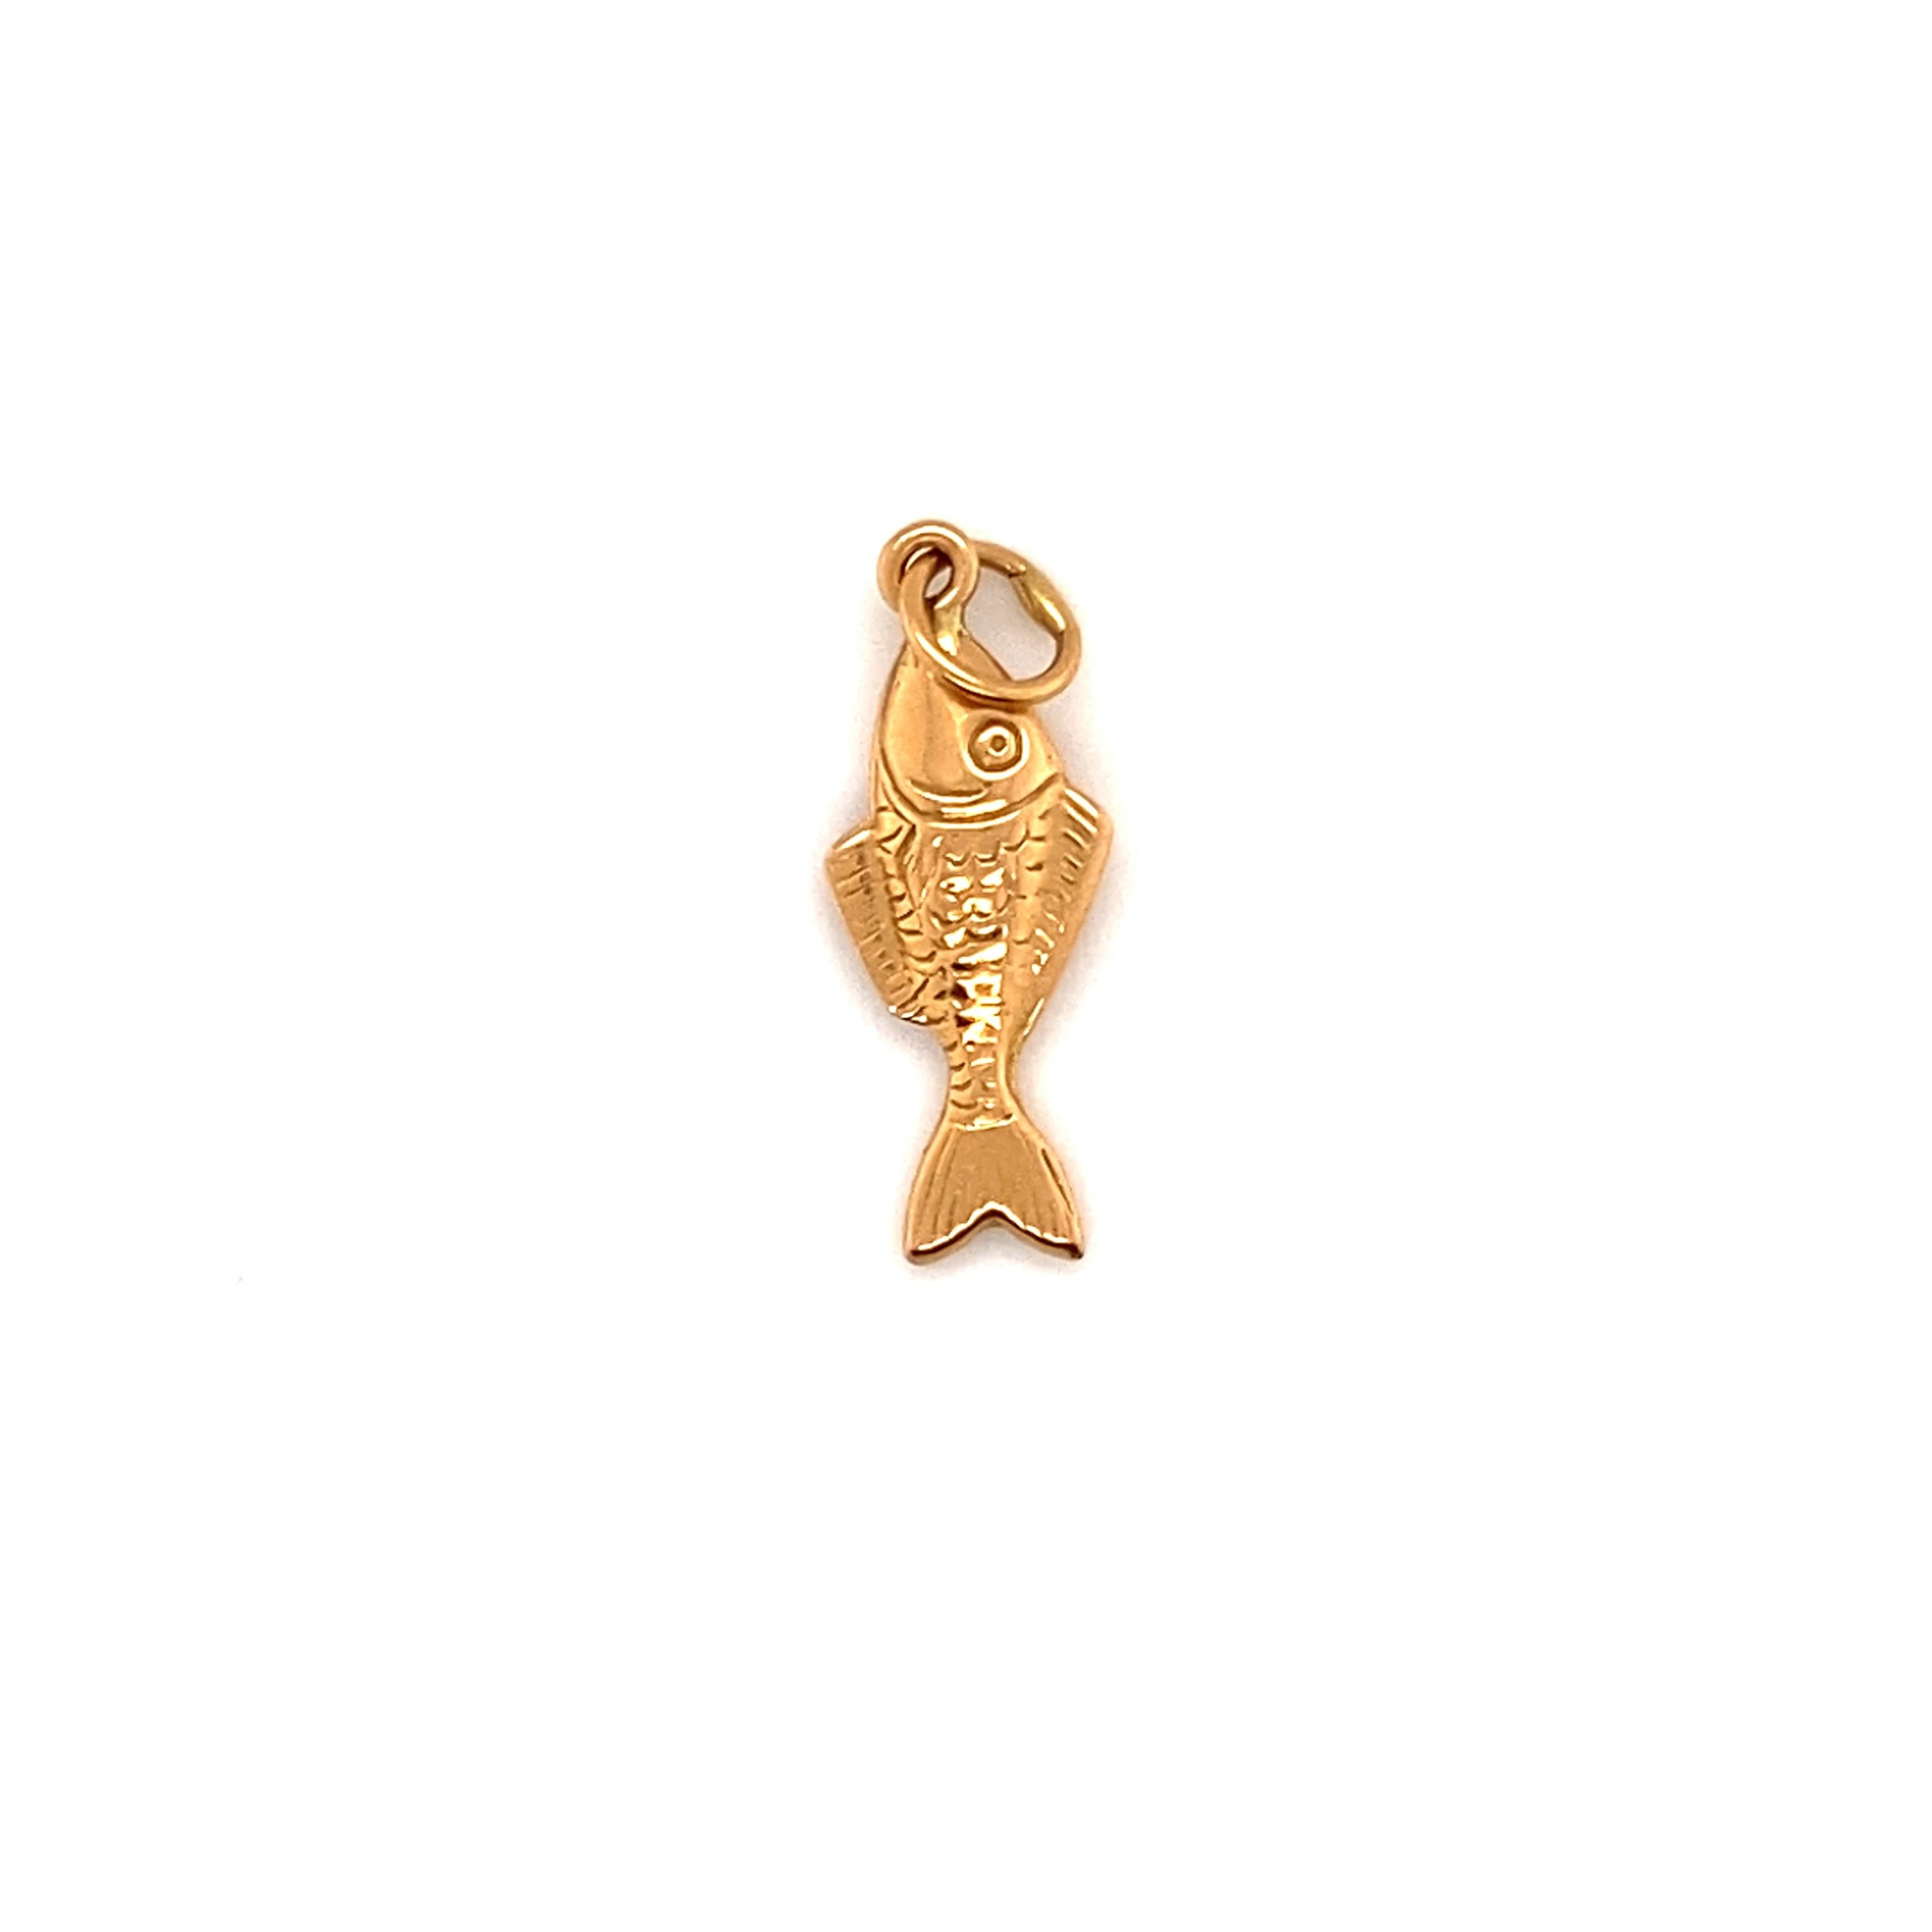 Item details: 
Metal: 14 karat yellow gold 
Weight: .7 grams 
Measurements: 1 inch length x .25 inches width 
